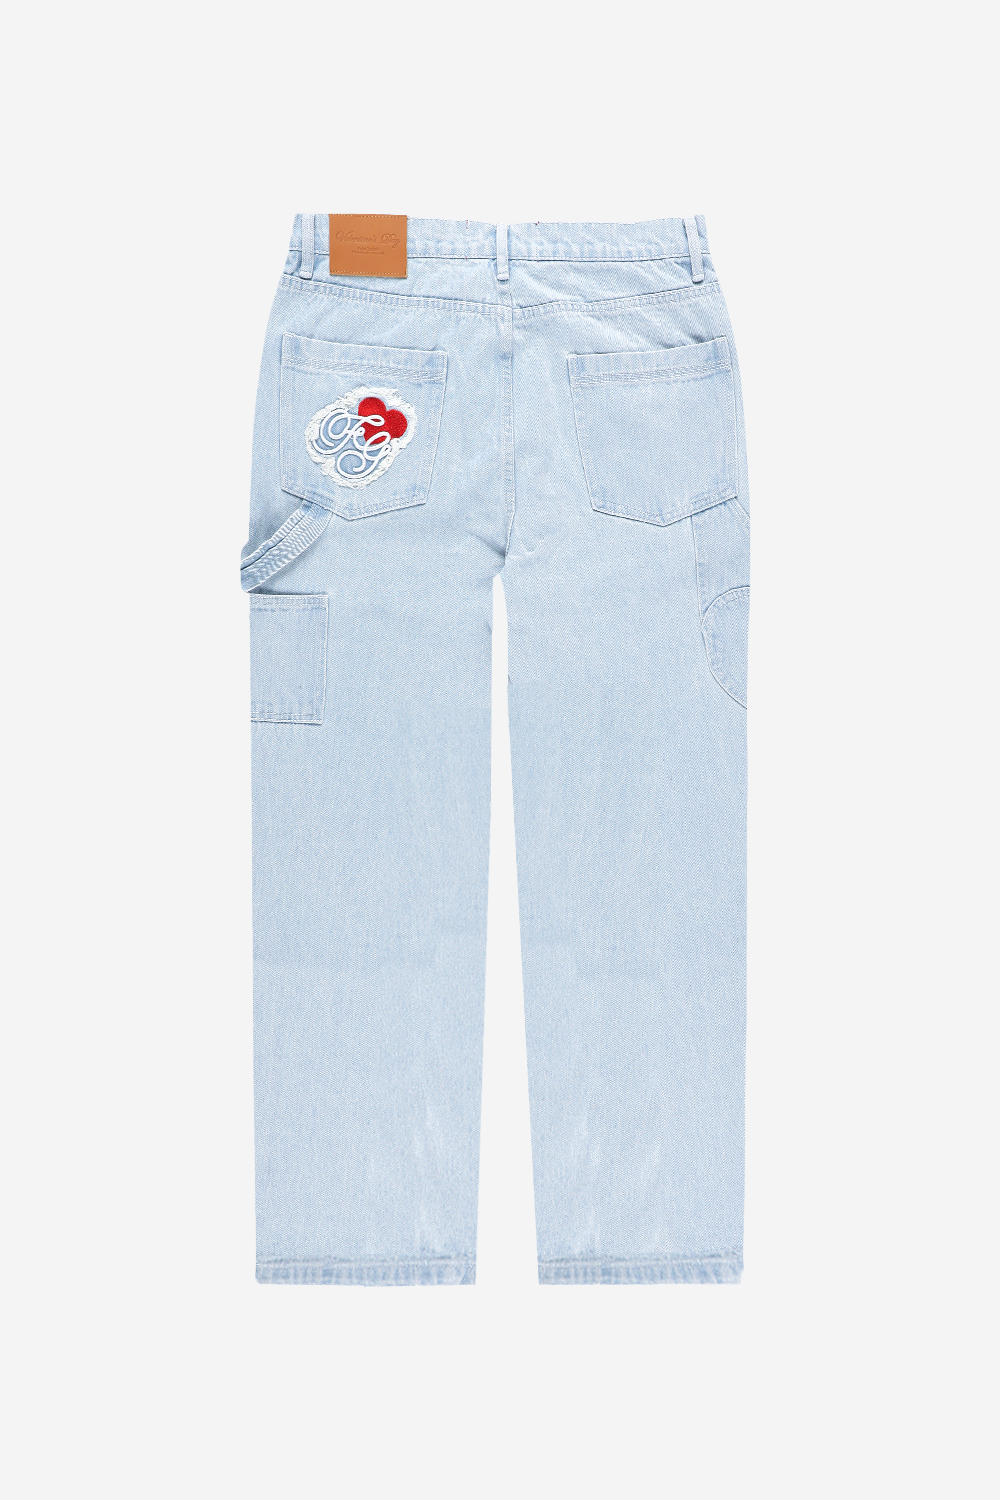 STRAIGHT TO THE HEART JEANS BLUE